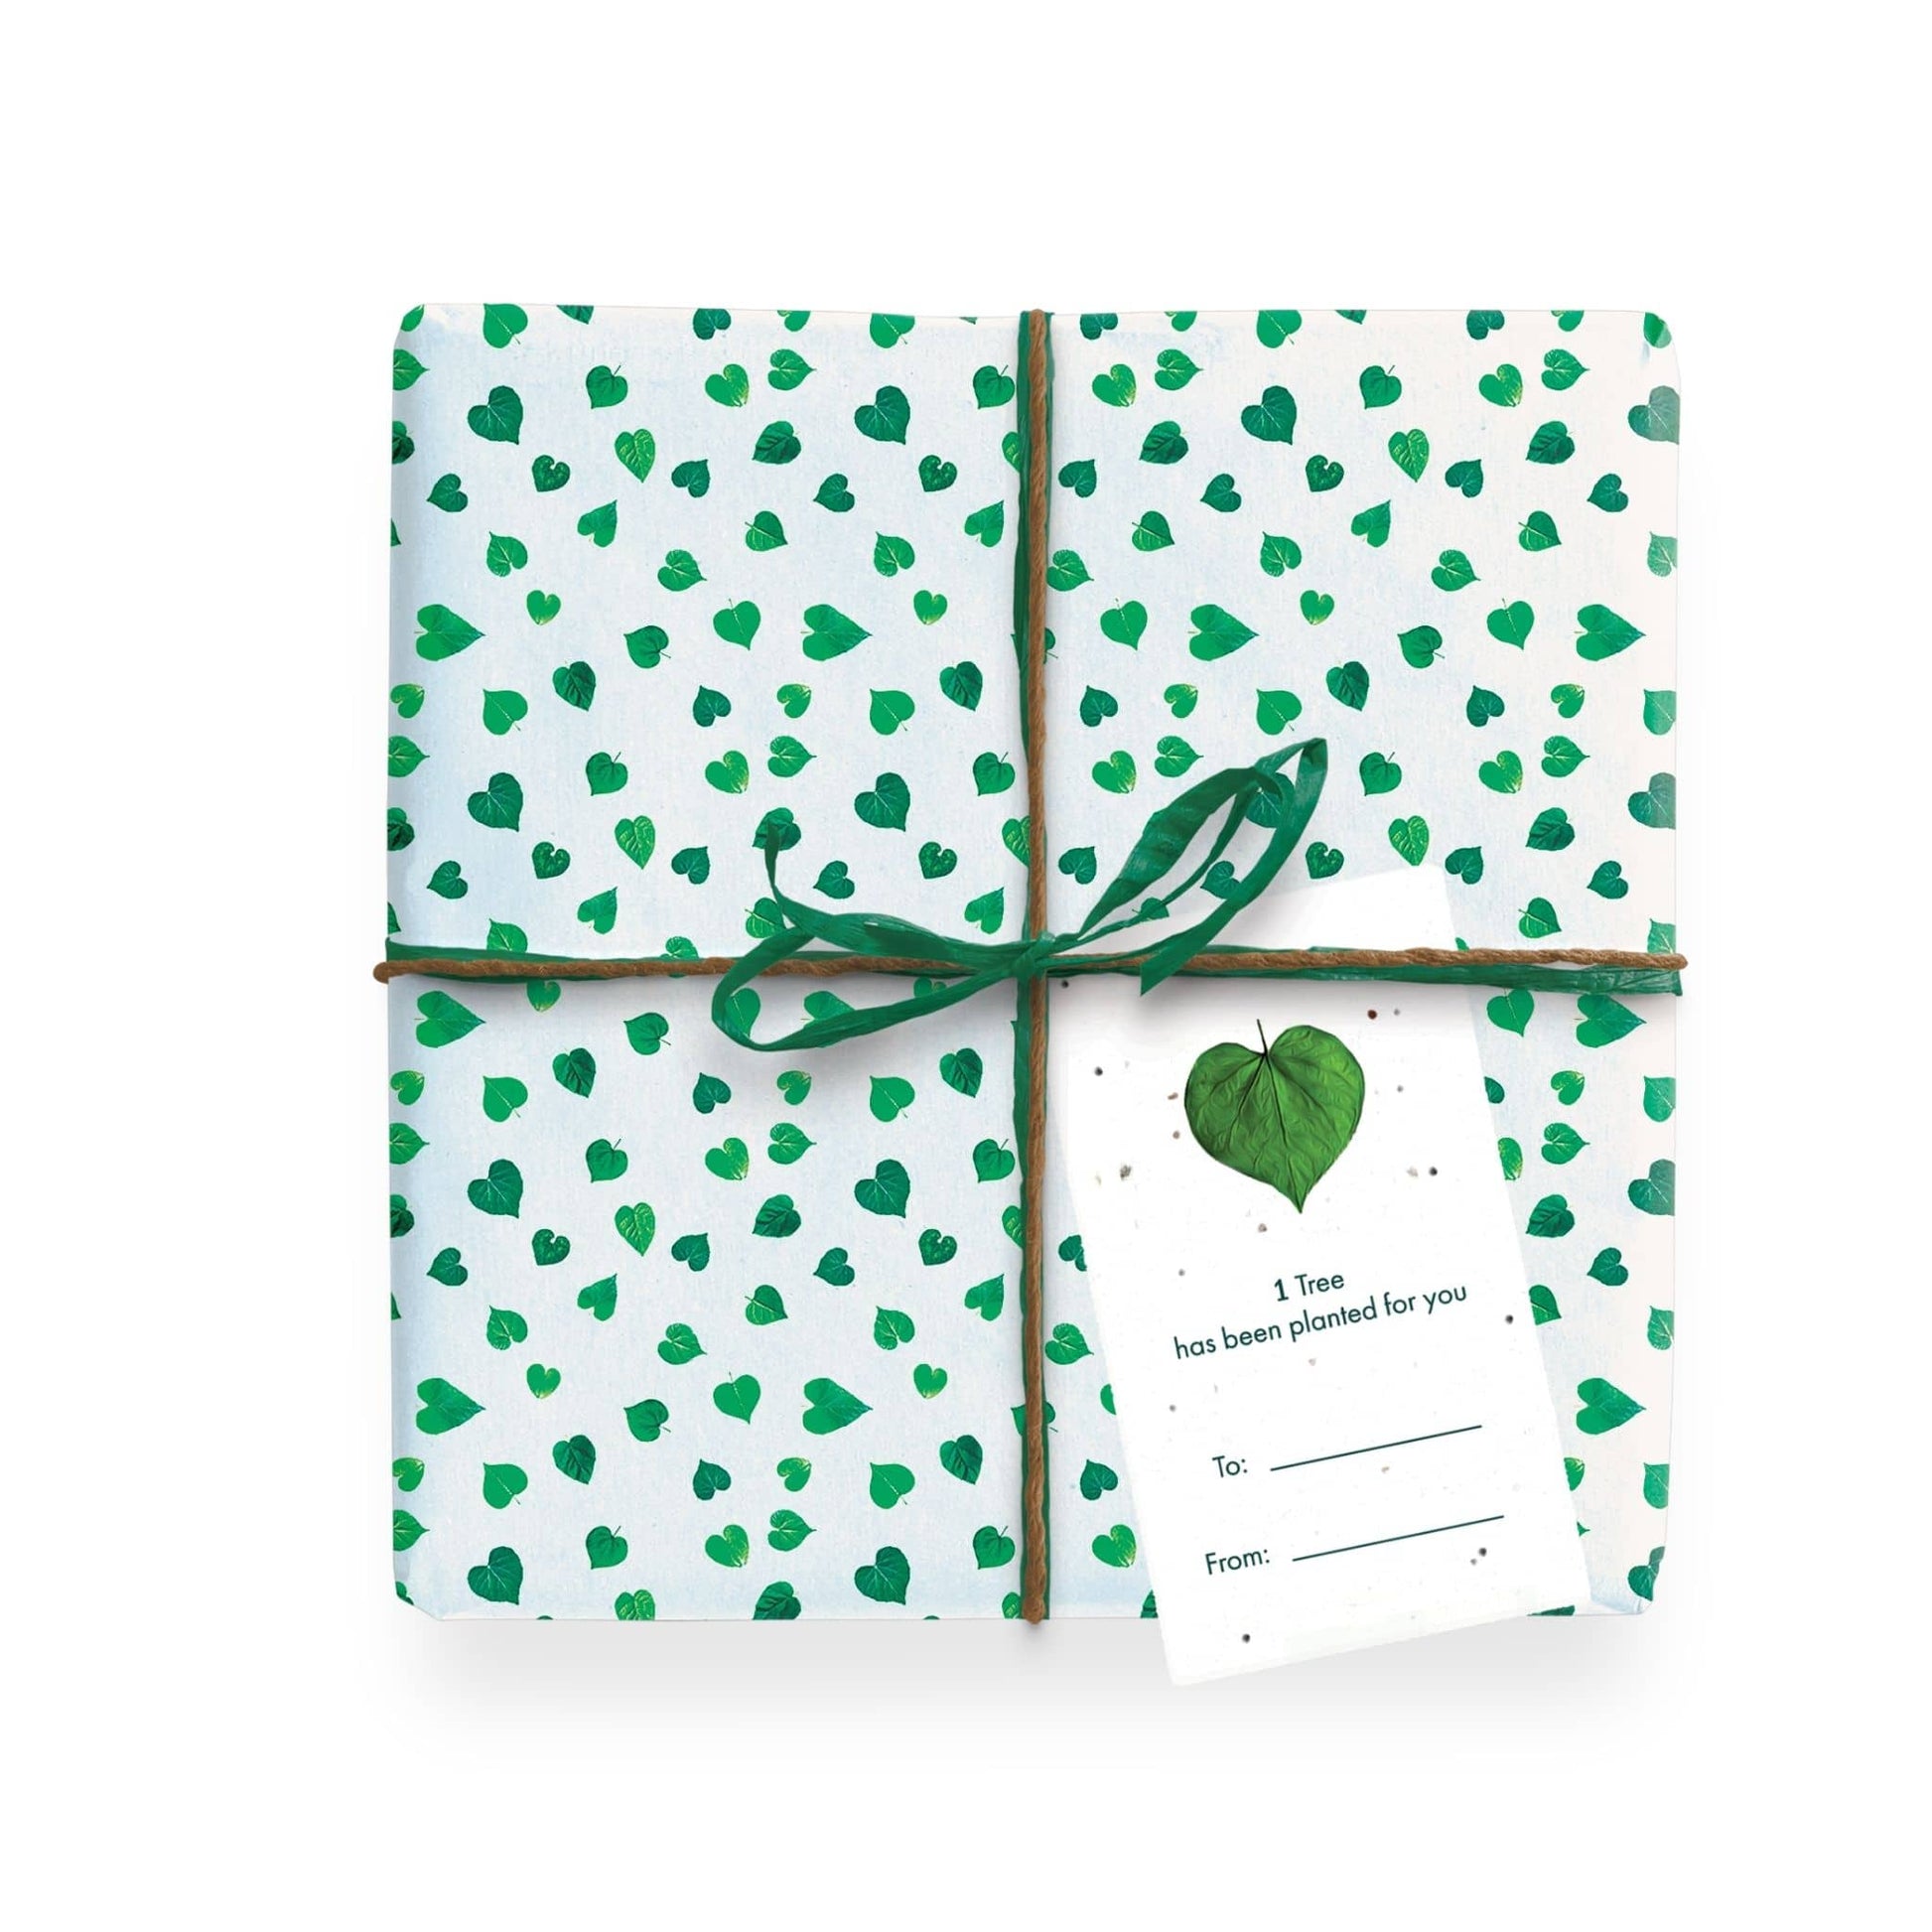 1 Tree Cards Wrapping Paper Pack - green hearts gift